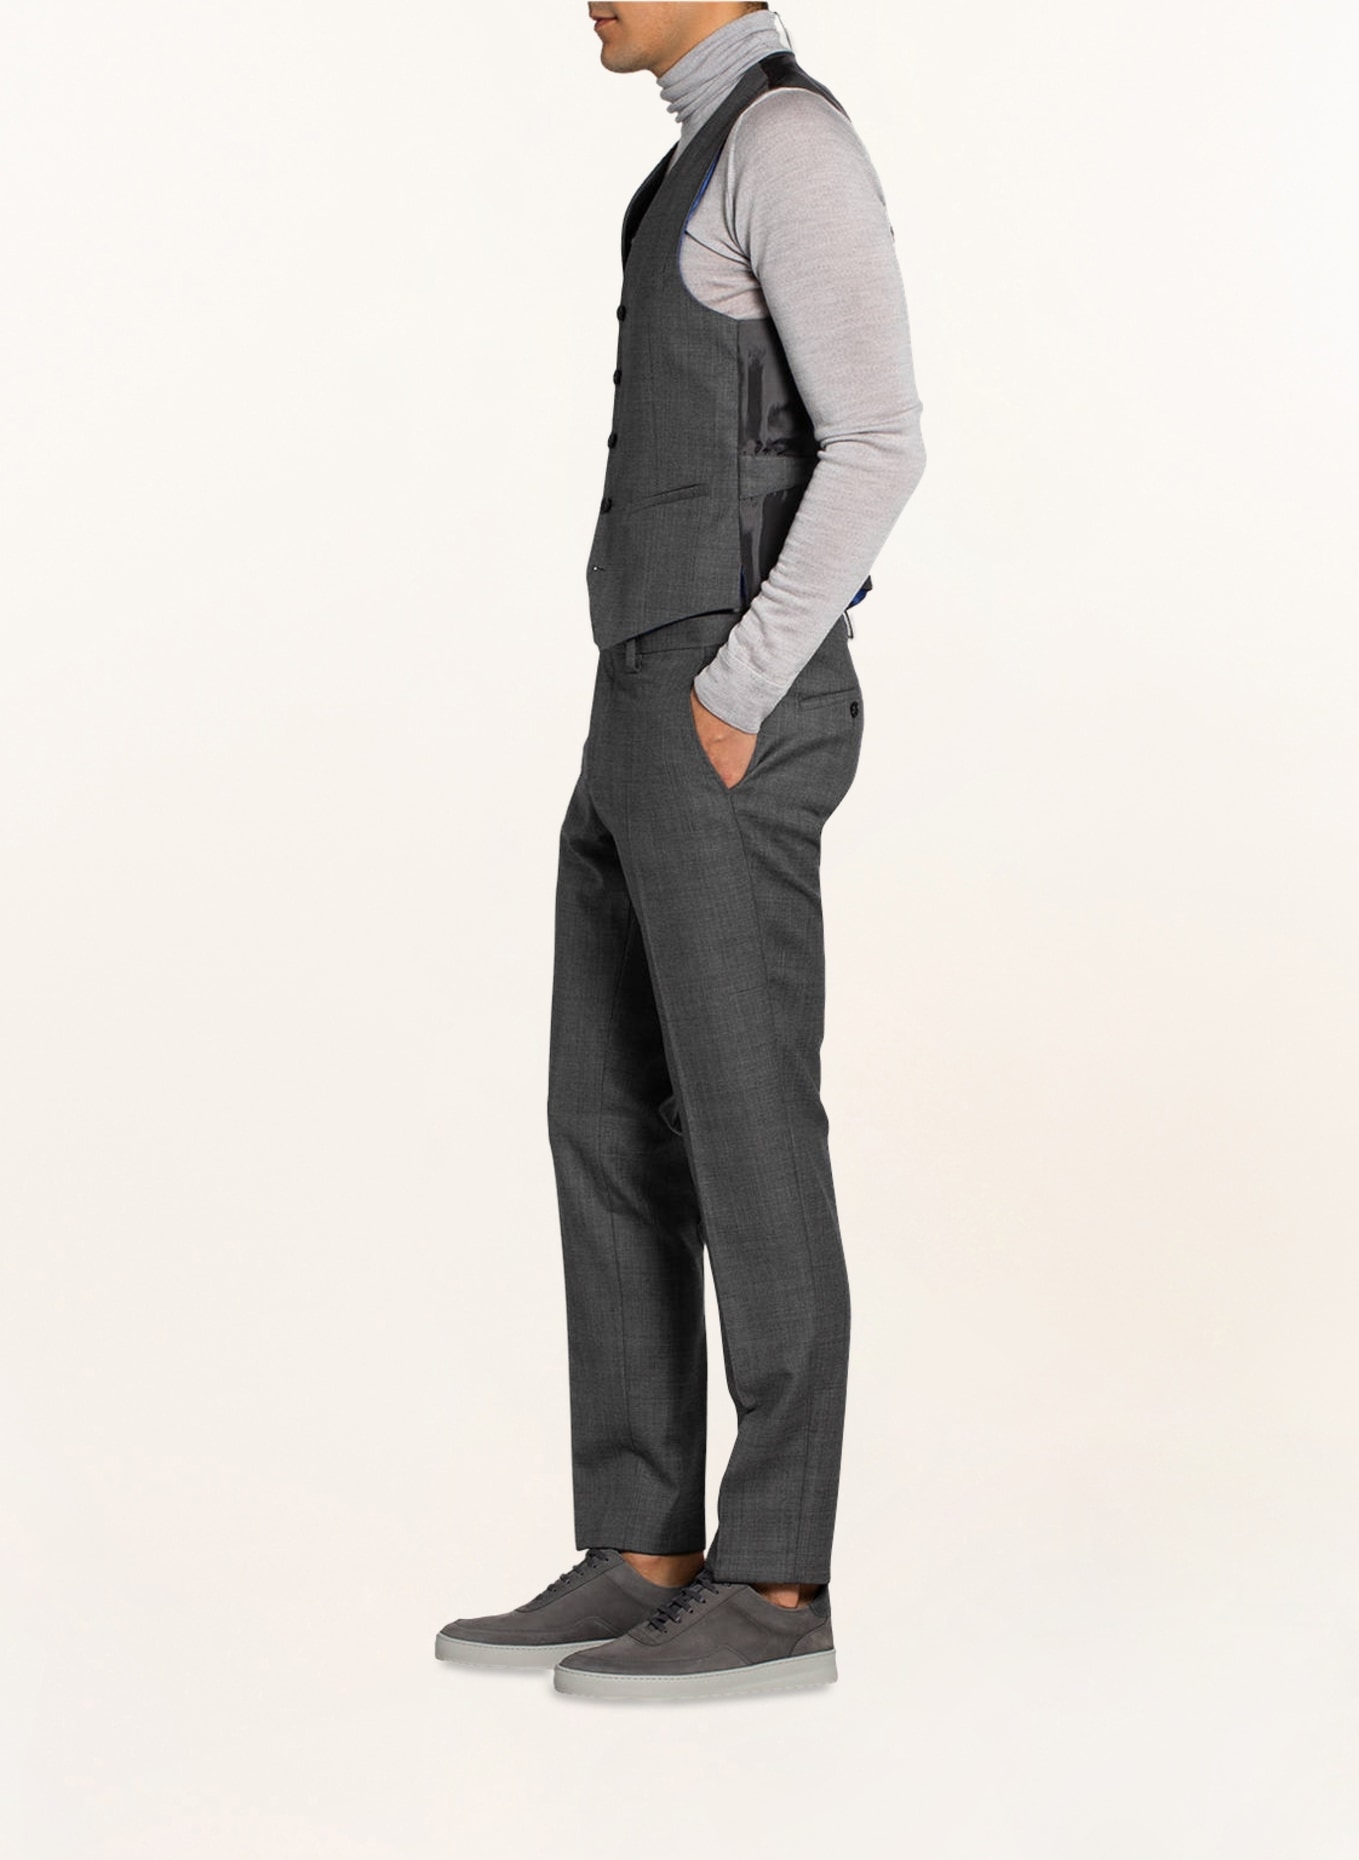 CG - CLUB of GENTS Suit trousers CHAZ regular fit, Color: 81 grau hell (Image 5)